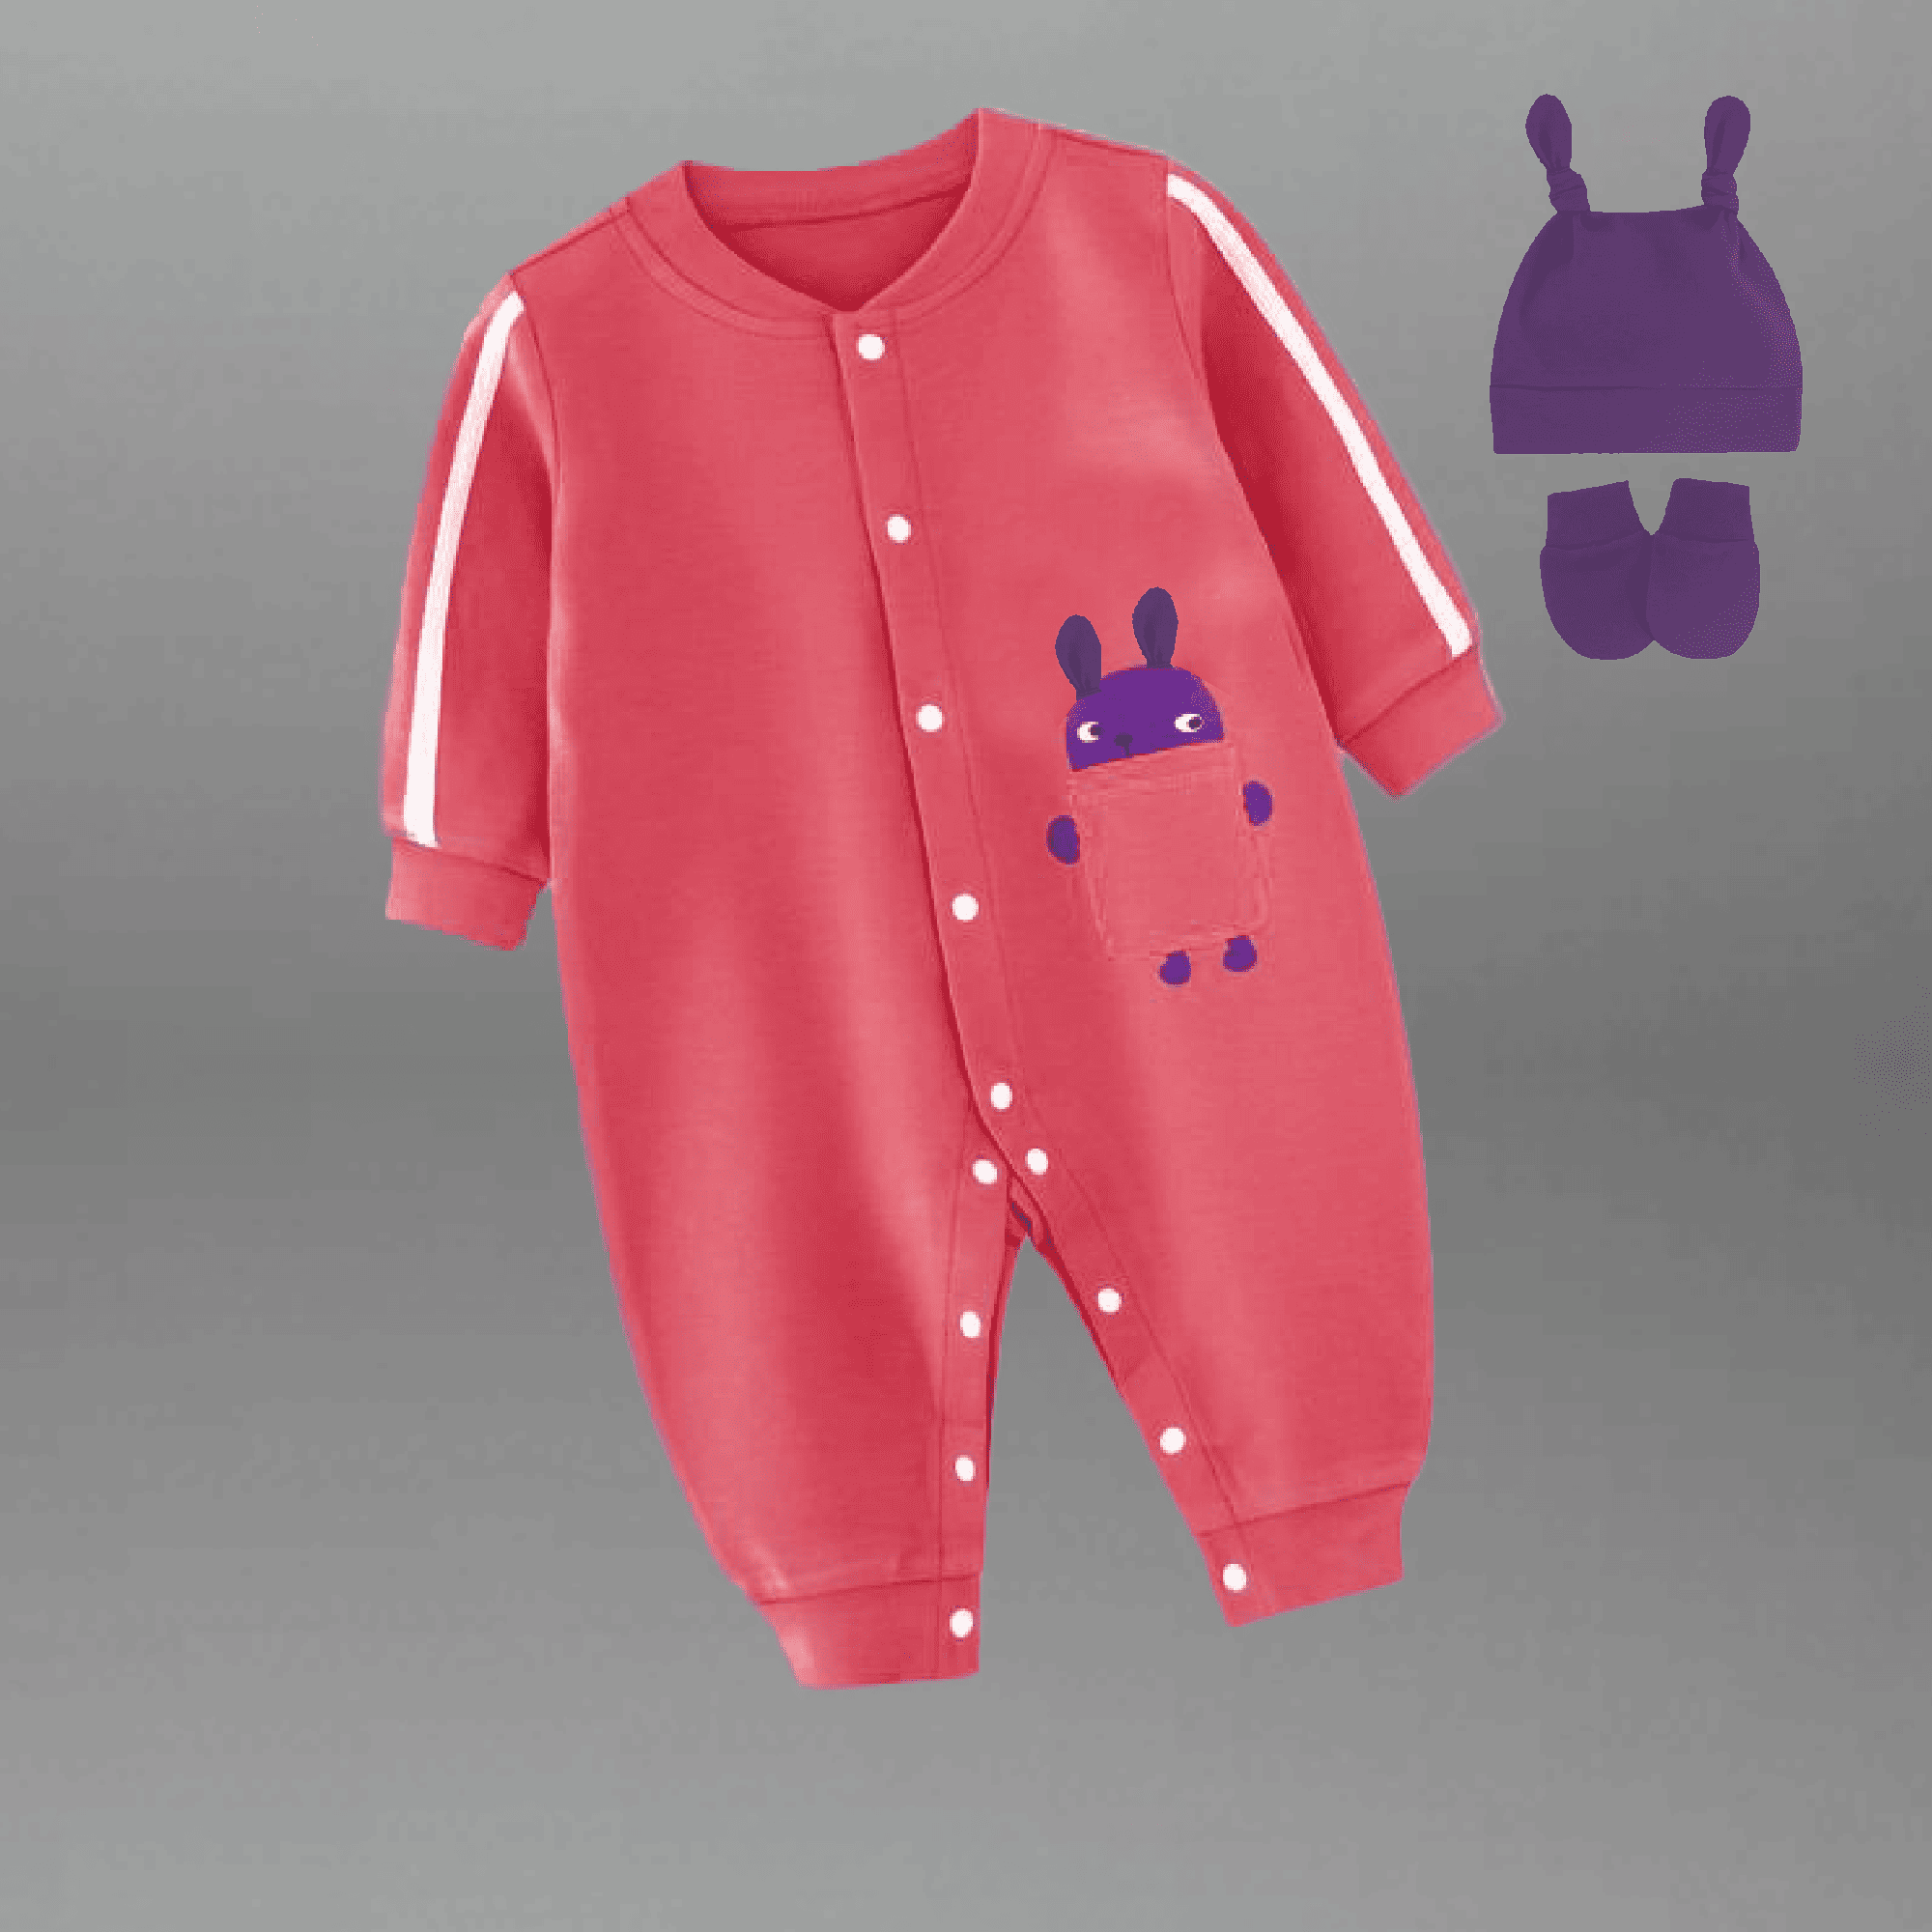 Toddler's Pink Romper with free cap and socks-RKFCTT109